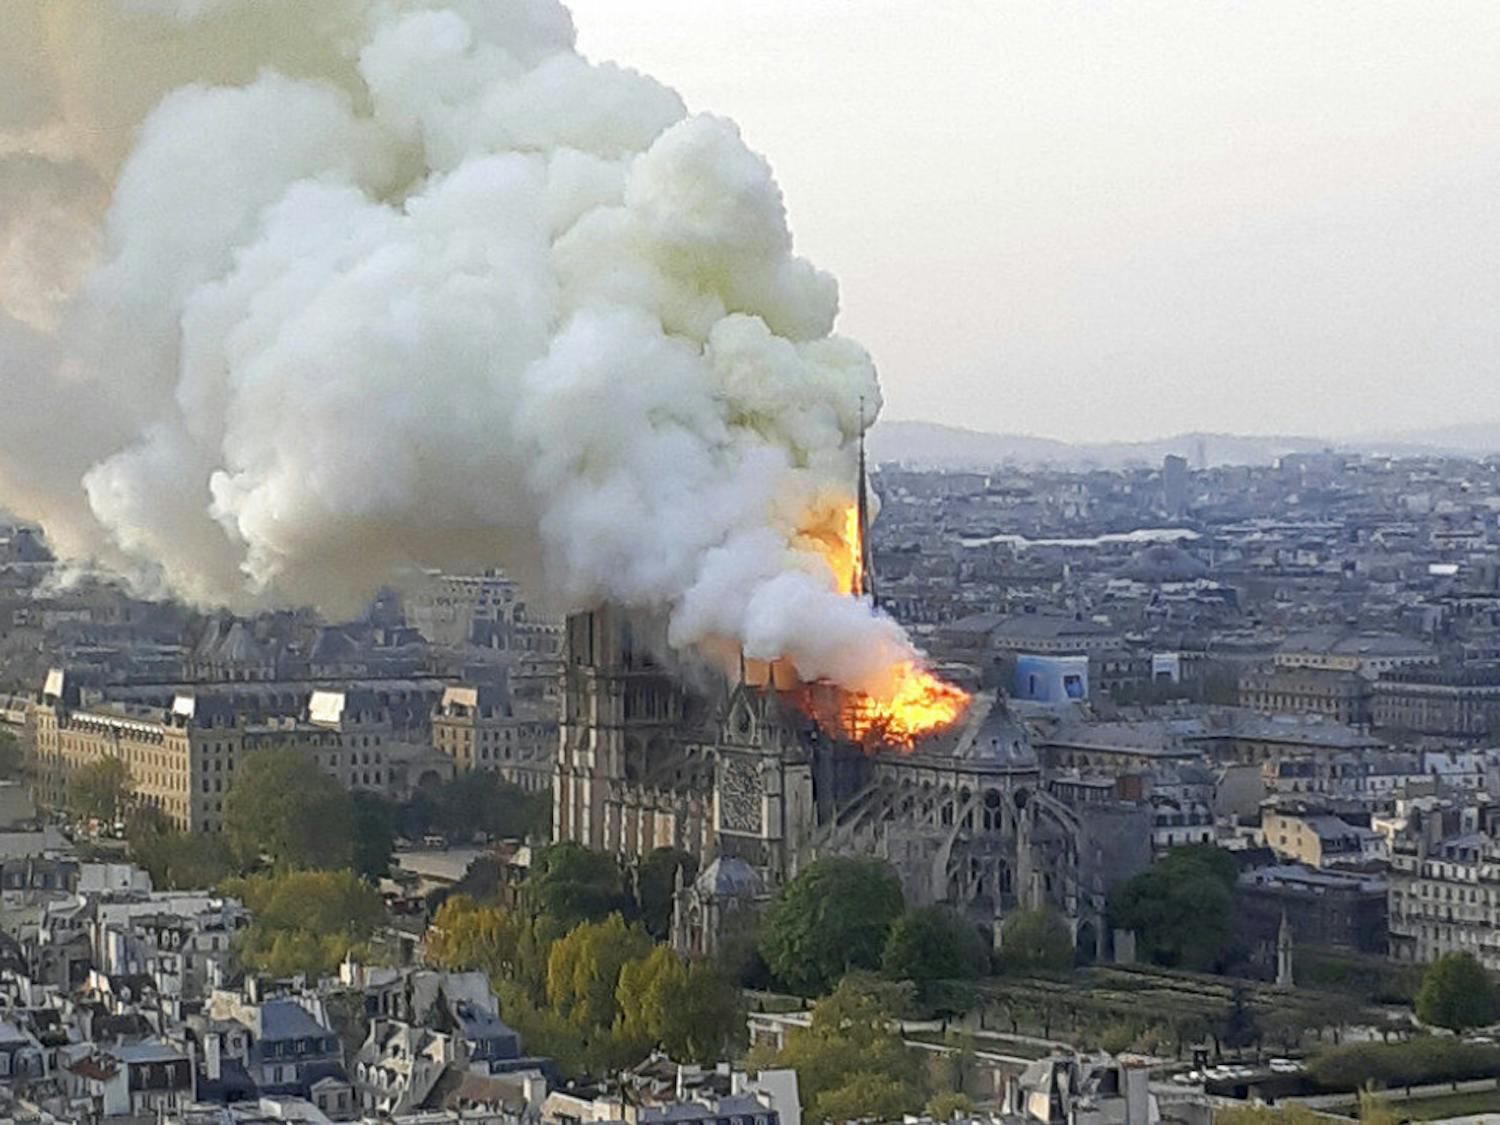 In this image made available on Tuesday April 16, 2019 flames and smoke rise from the blaze at Notre Dame cathedral in Paris, Monday, April 15, 2019. An inferno that raged through Notre Dame Cathedral for more than 12 hours destroyed its spire and its roof but spared its twin medieval bell towers, and a frantic rescue effort saved the monument's "most precious treasures," including the Crown of Thorns purportedly worn by Jesus, officials said Tuesday. (AP Photo/Cedric Herpson)